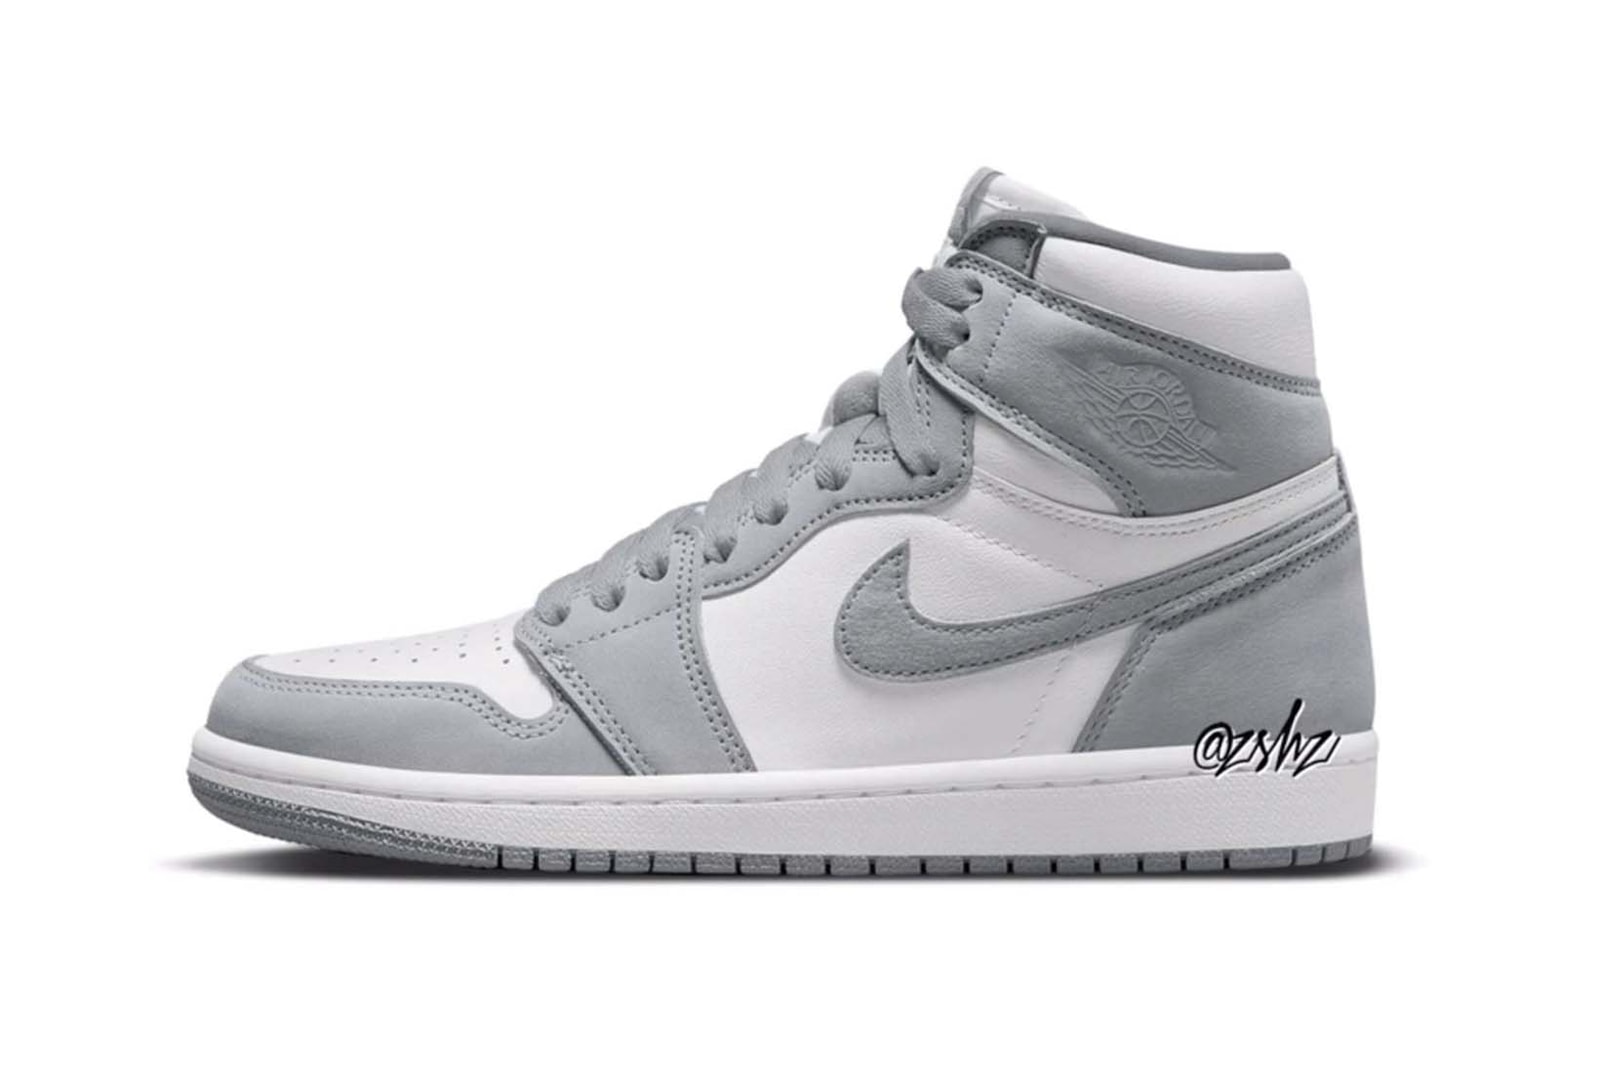 Nike Air Jordan Fall 2022 Collection Grey High OG Price Release Date Collaboration